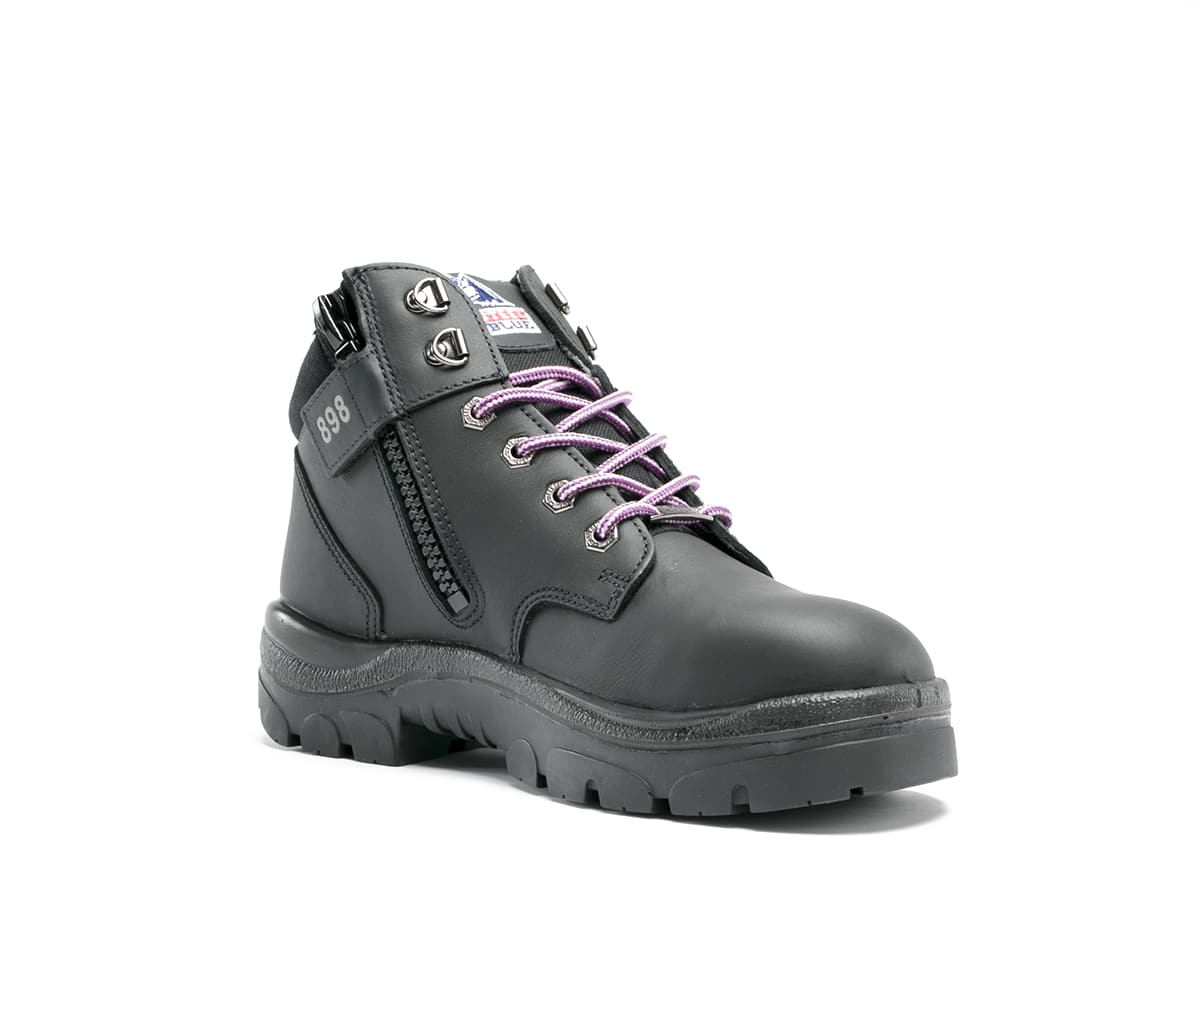 black and pink steel toe boots